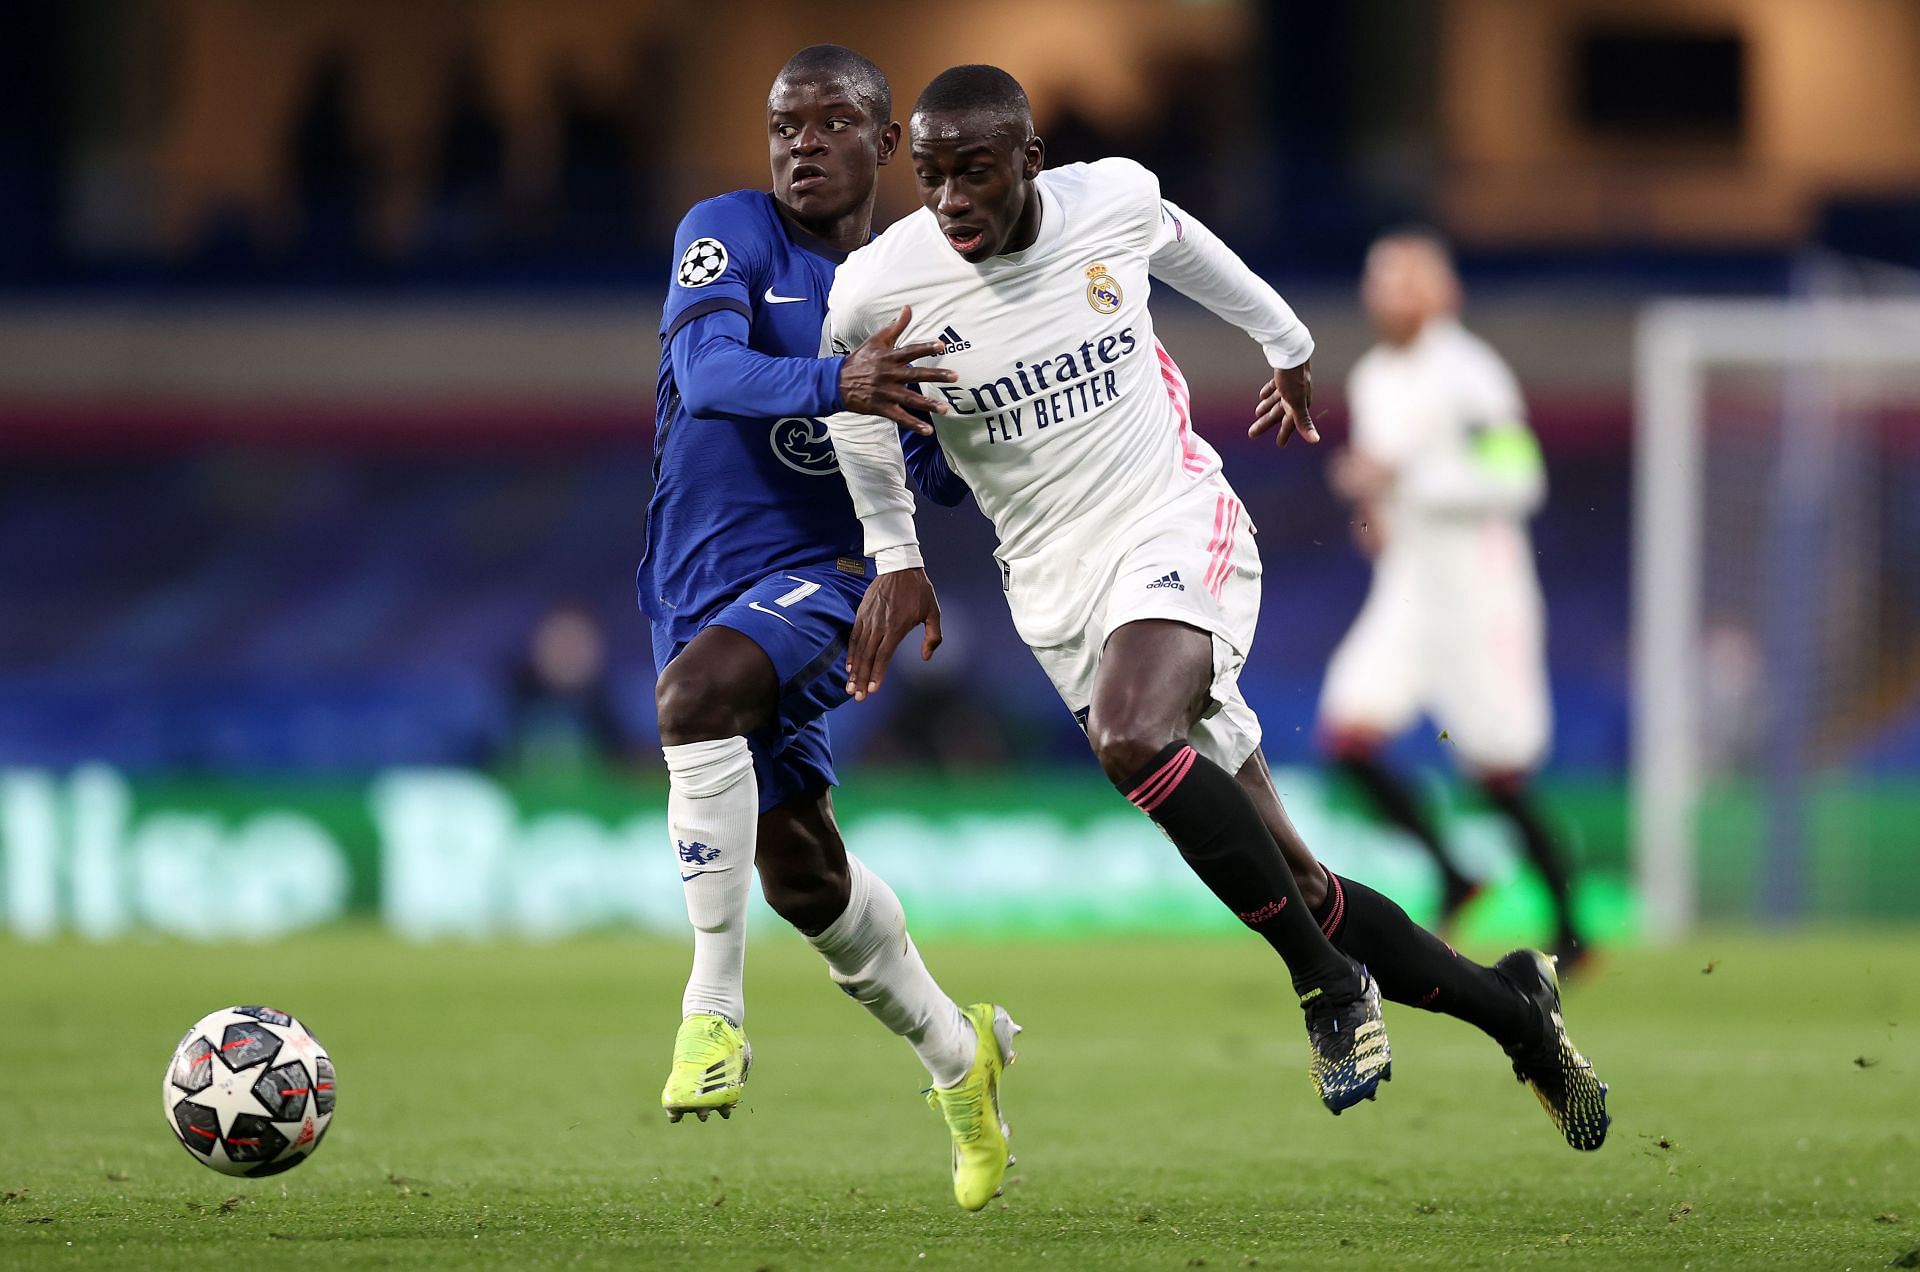 Ferland Mendy (right) is expected to leave Real Madrid this summer.